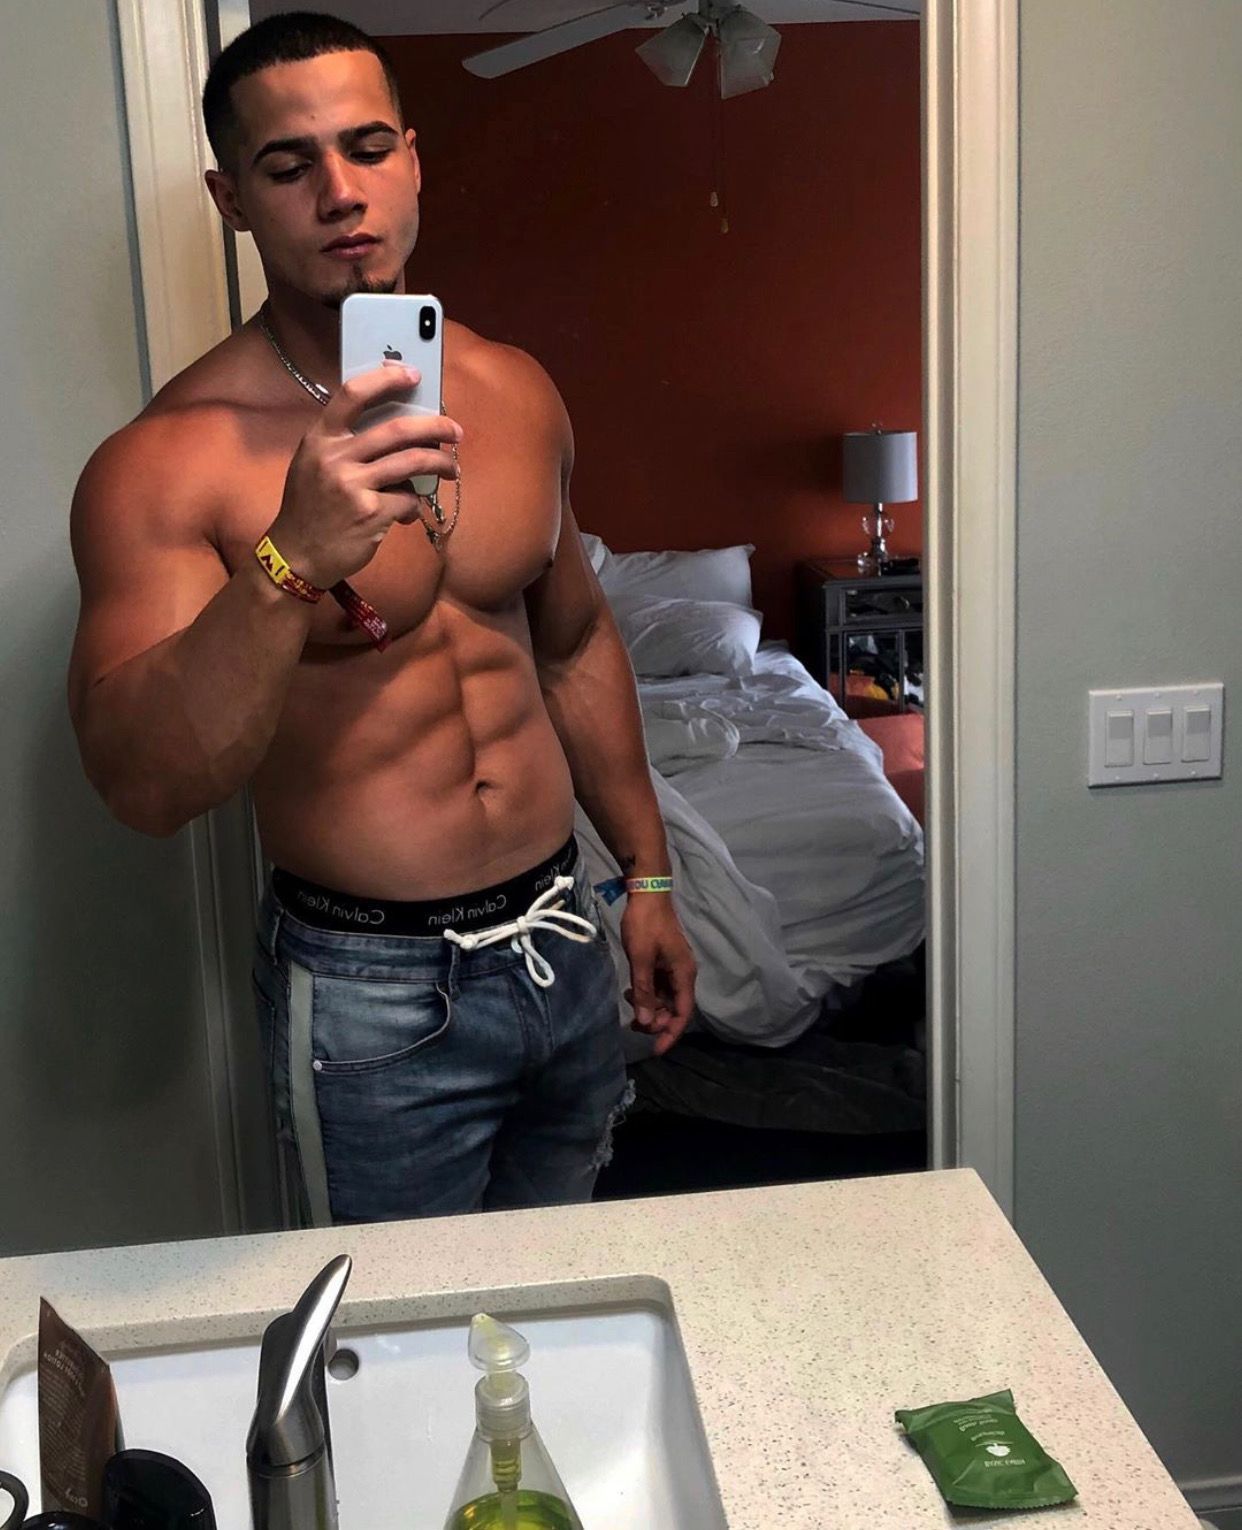 Danny Soar's Buff Body Takes Center Stage in Hot Gay Porn Pics